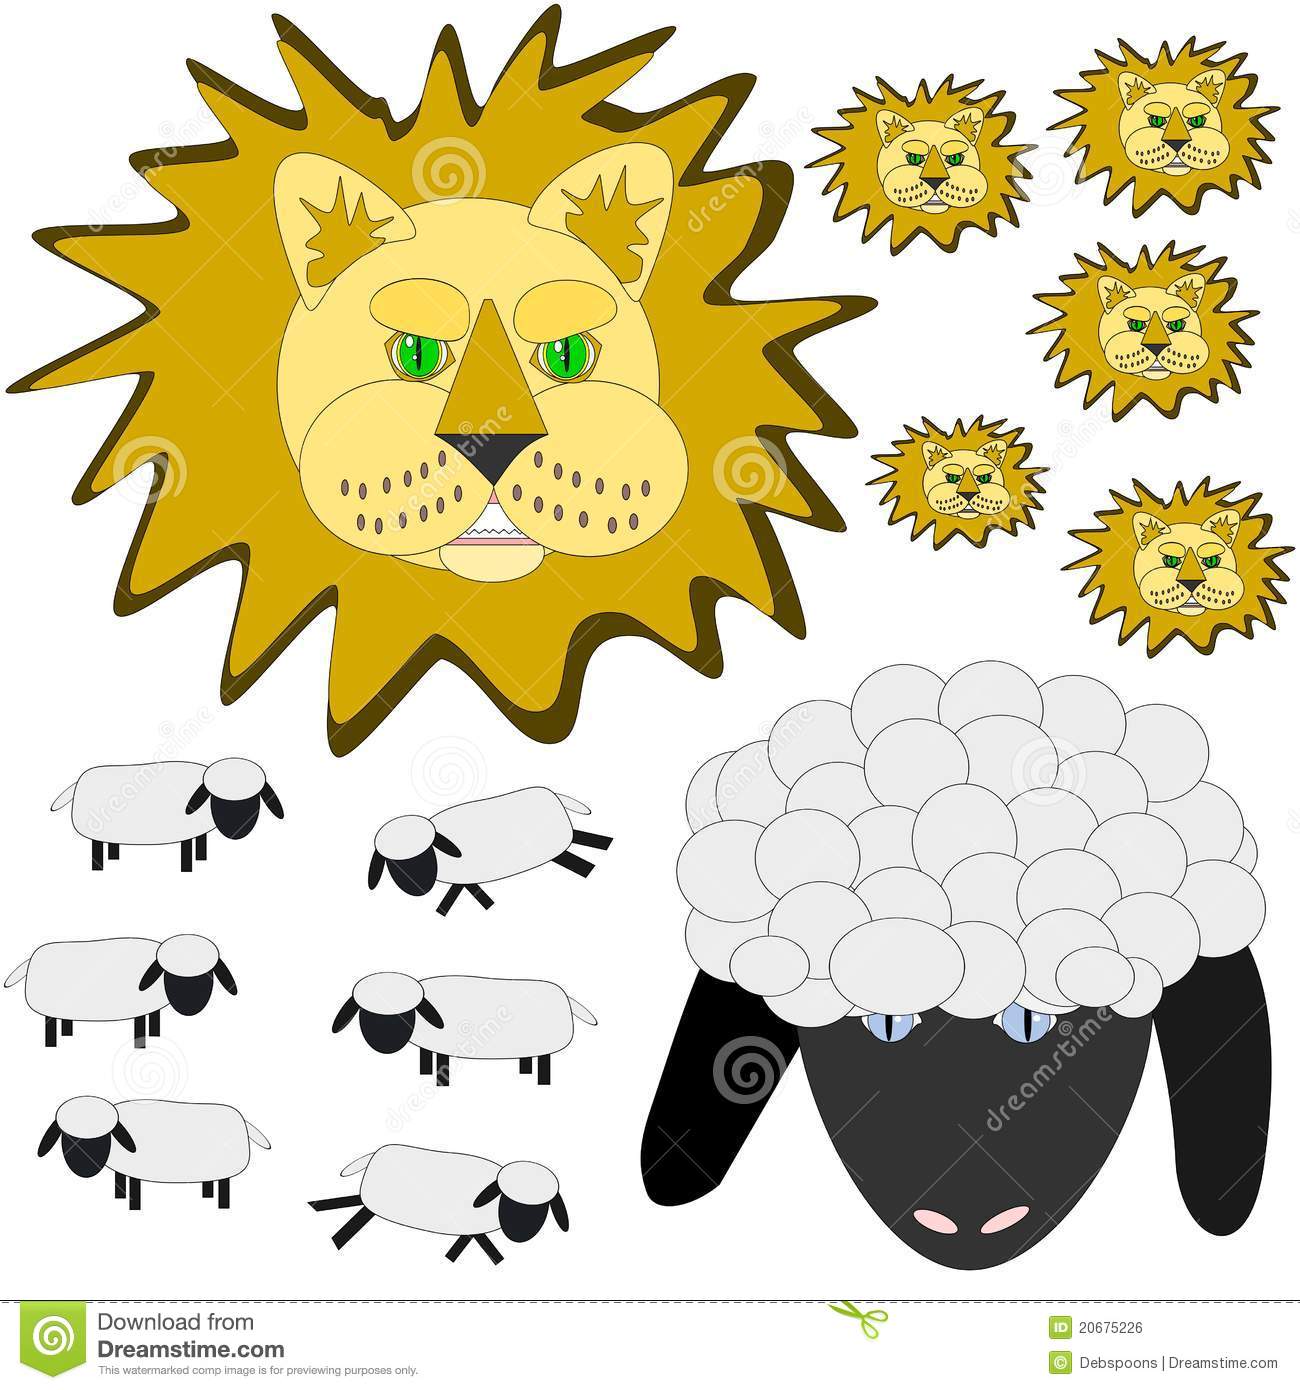 March lion and lamb stock vector. Illustration of.